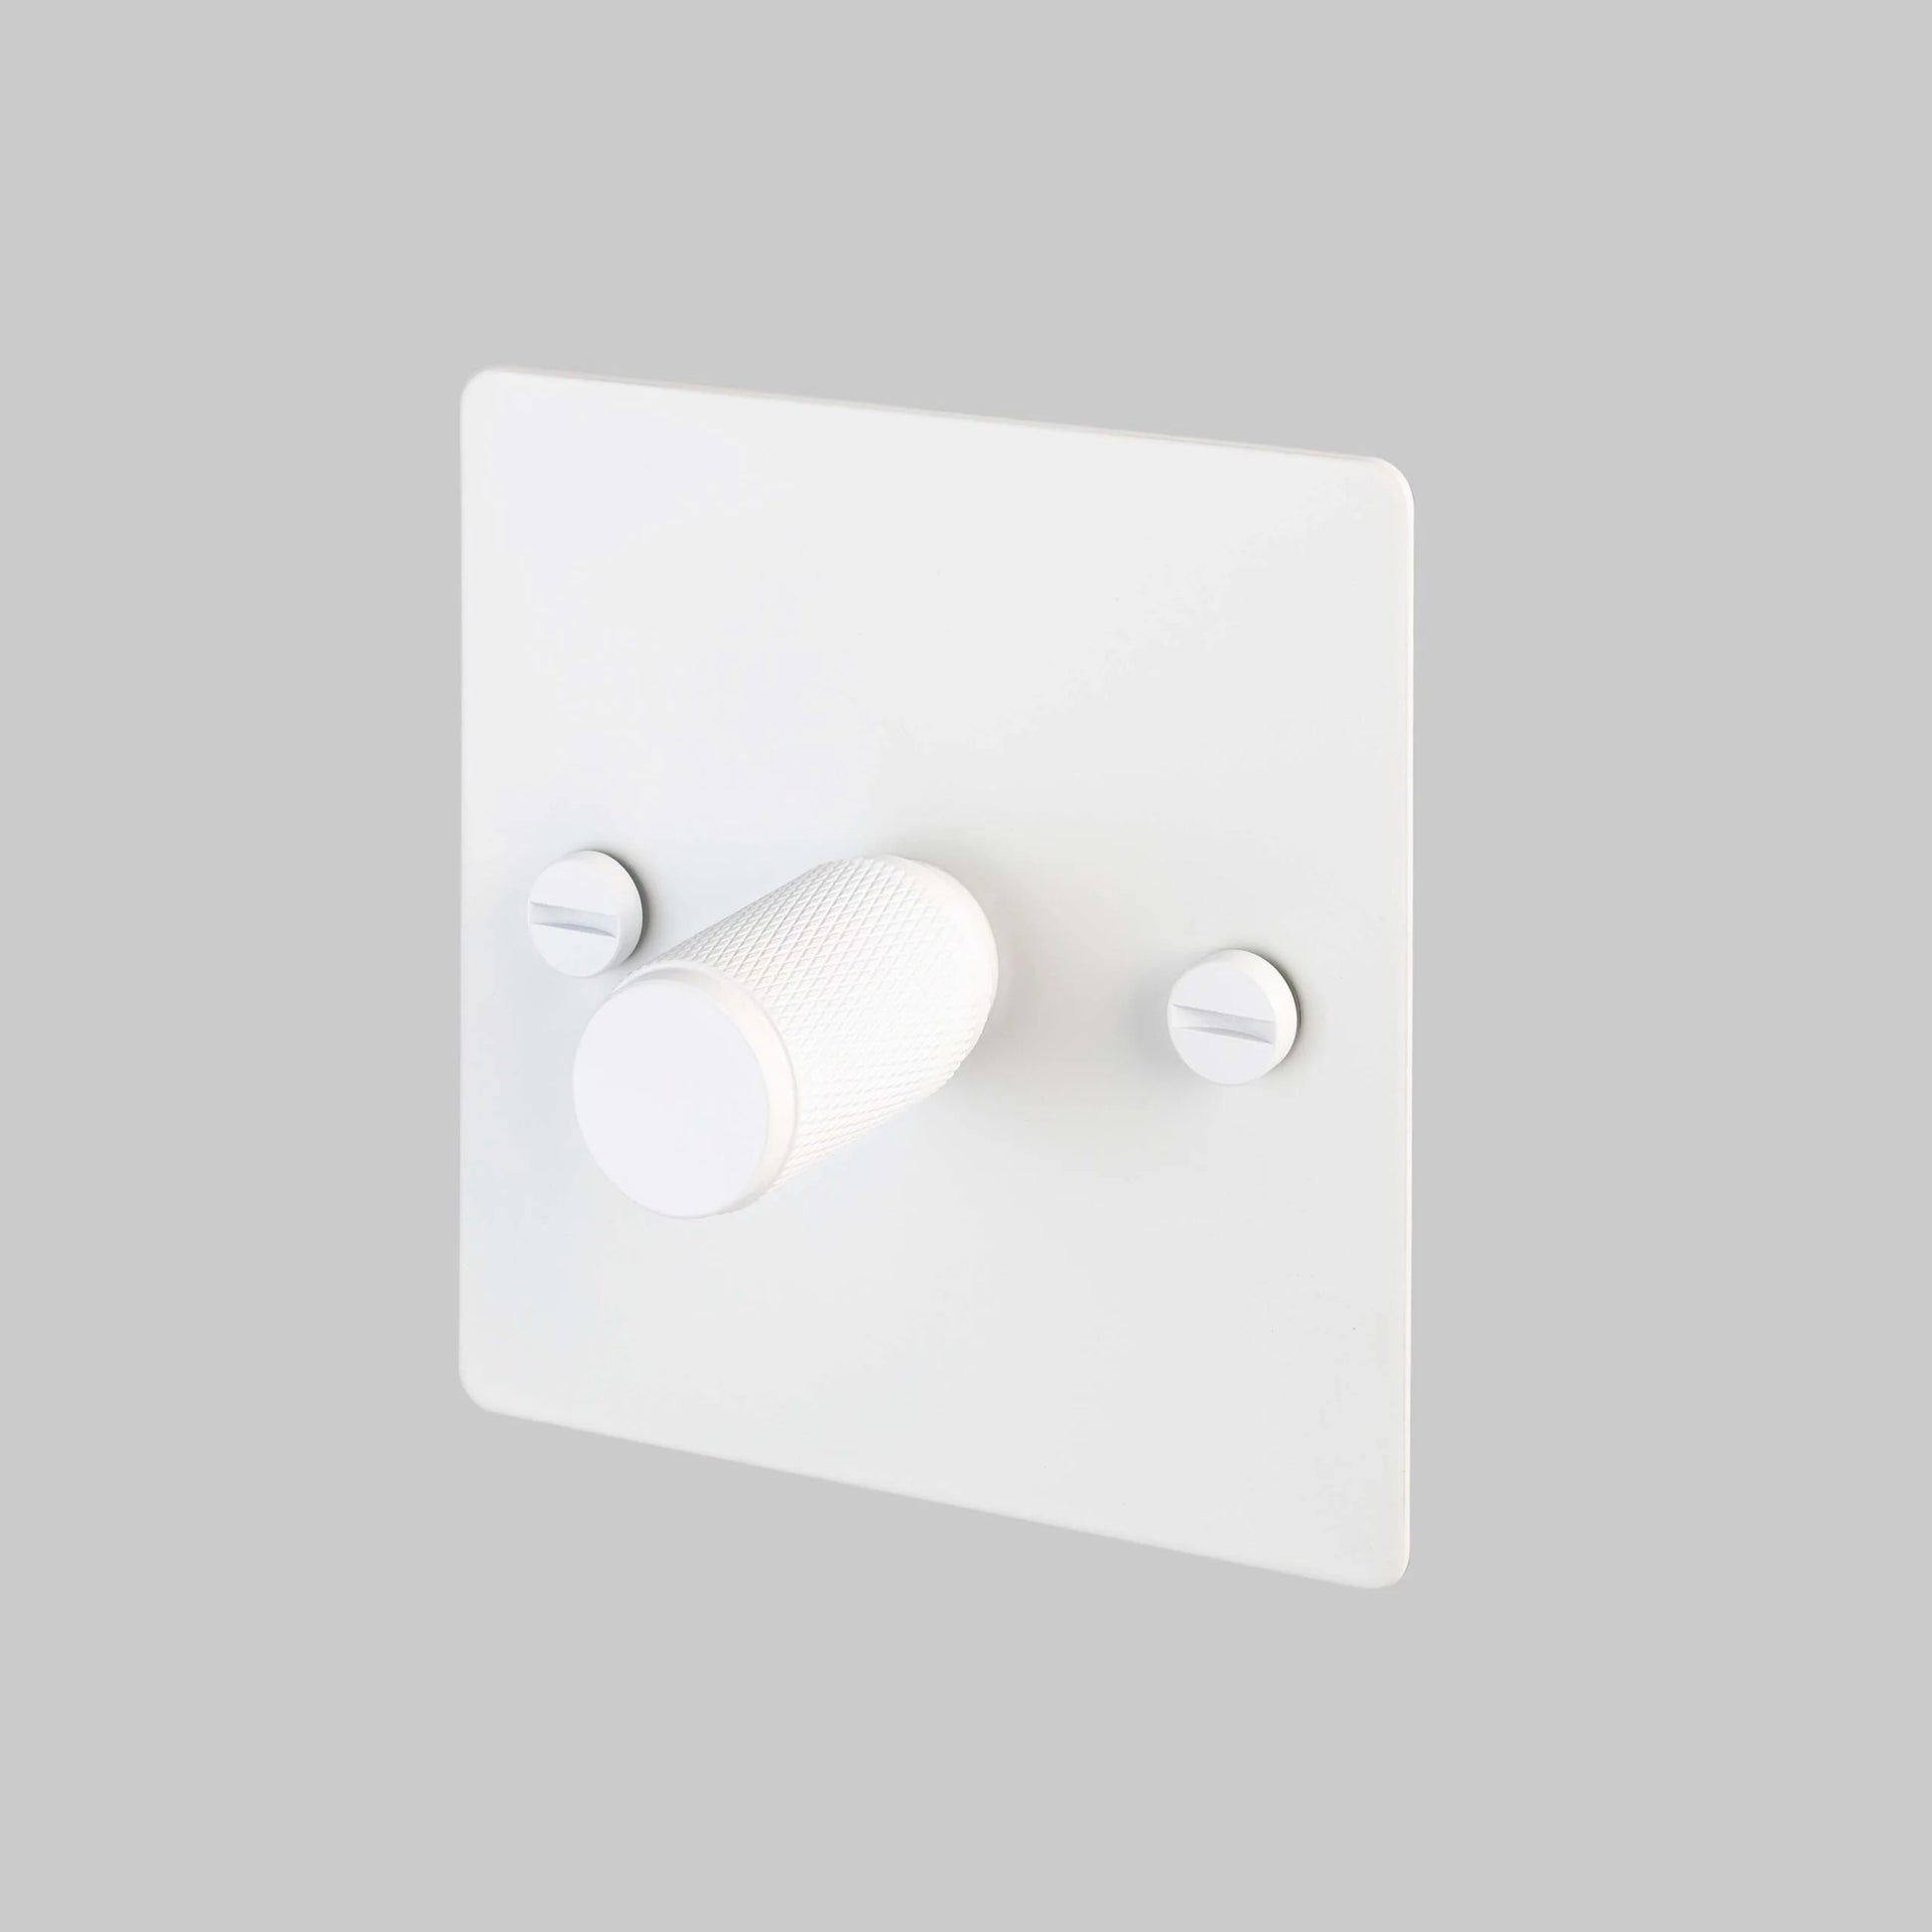 1G Dimmer/ 120W/ White with white details, angled view.